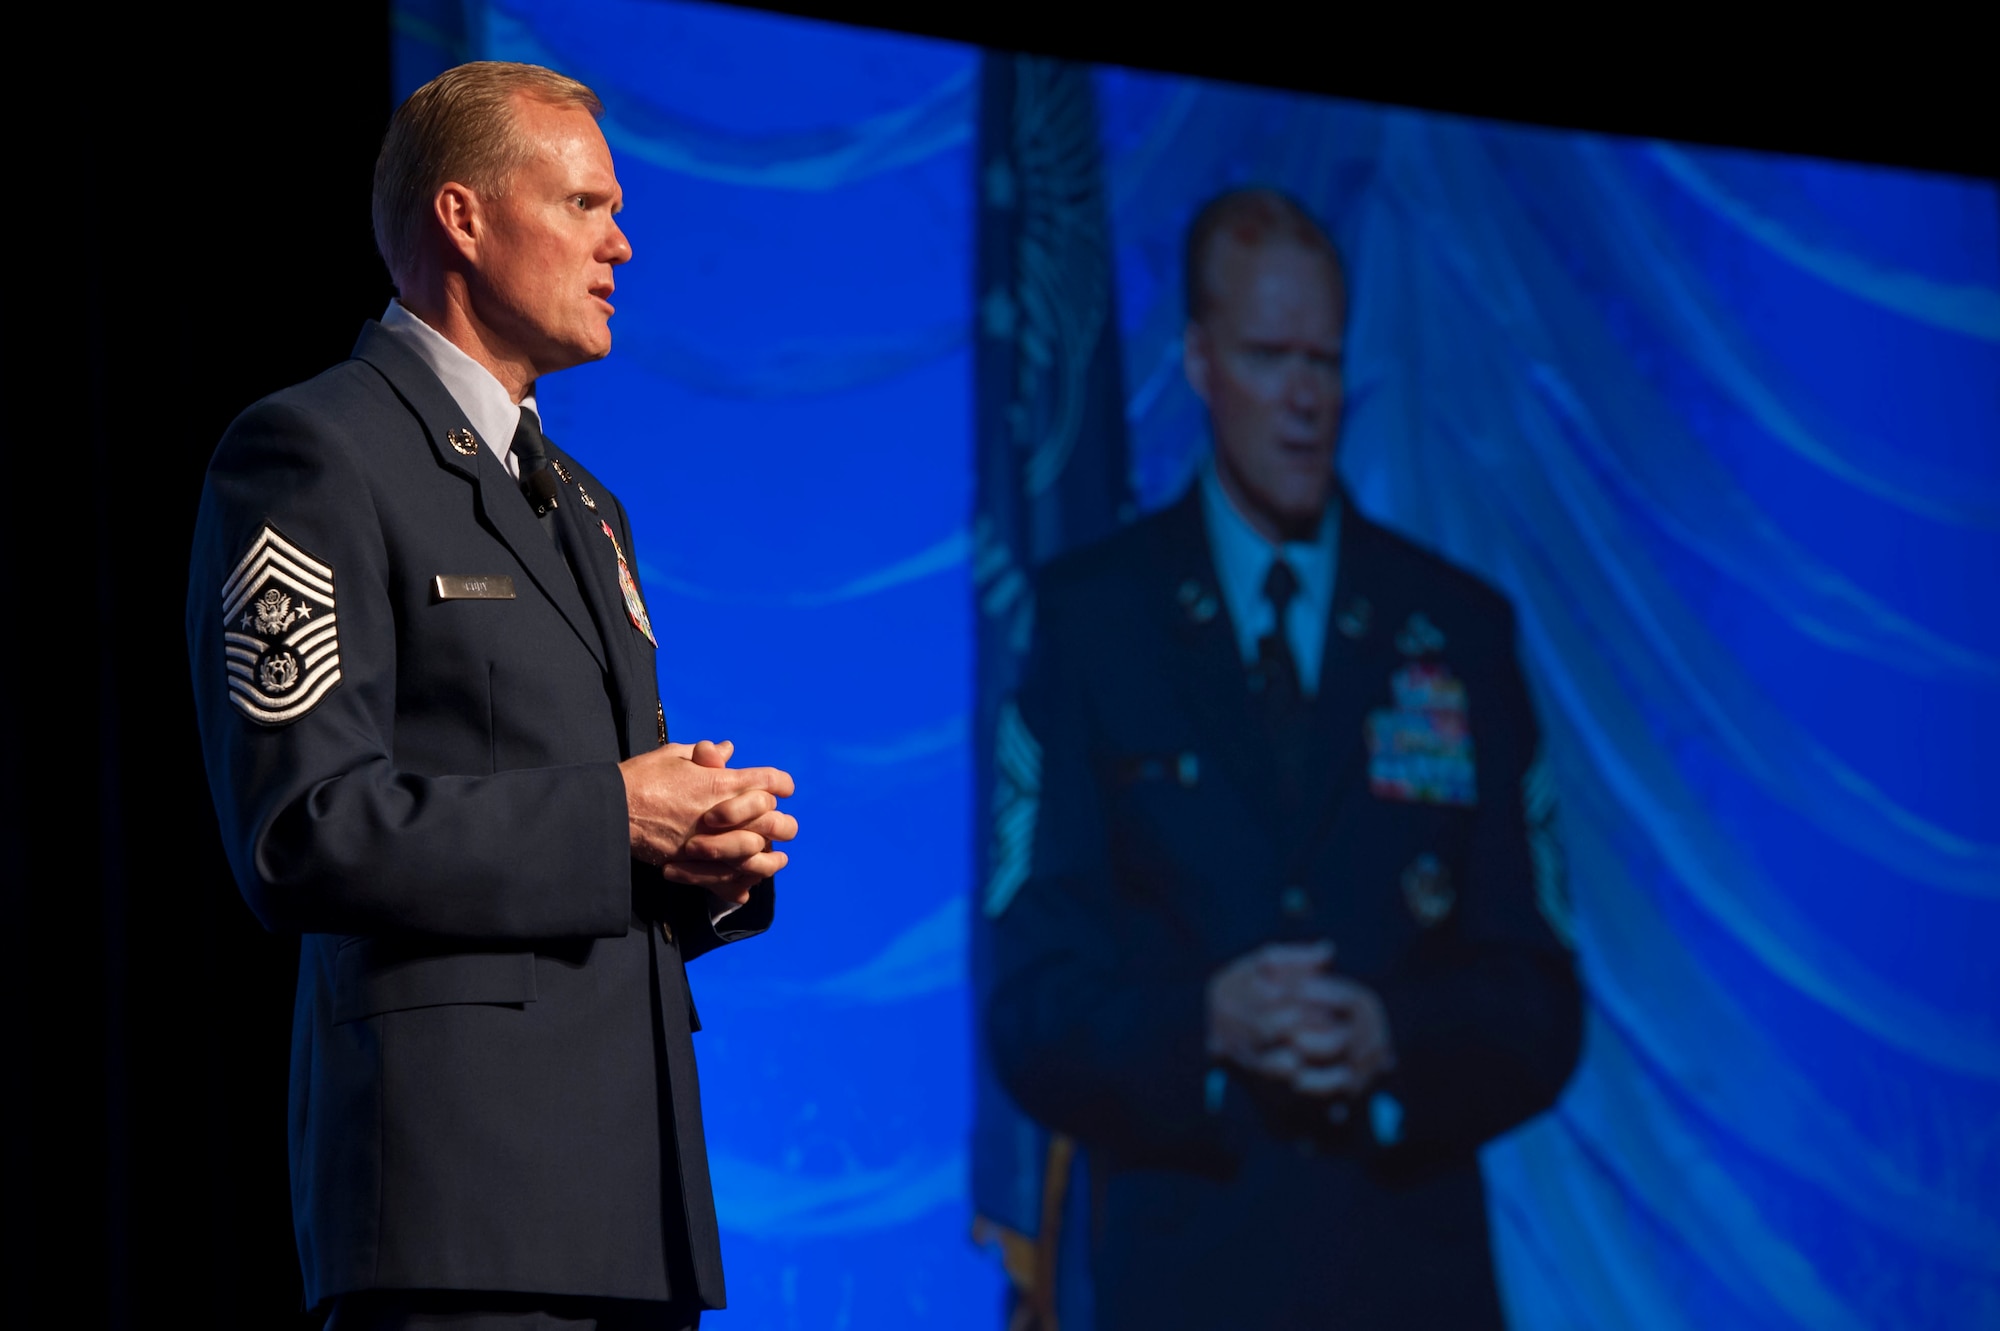 Chief Master Sgt. of the Air Force James A. Cody speaks to the audience during the 2013 Air Force Sergeants Association Professional Airmen’s Conference and International Convention Aug. 28, 2013, at the Grand Hyatt in San Antonio, Texas. Cody spoke during the AFSA PACs senior leader perspective professional development forum. (U.S. Air Force photo/Senior Airman DeAndre Curtiss)